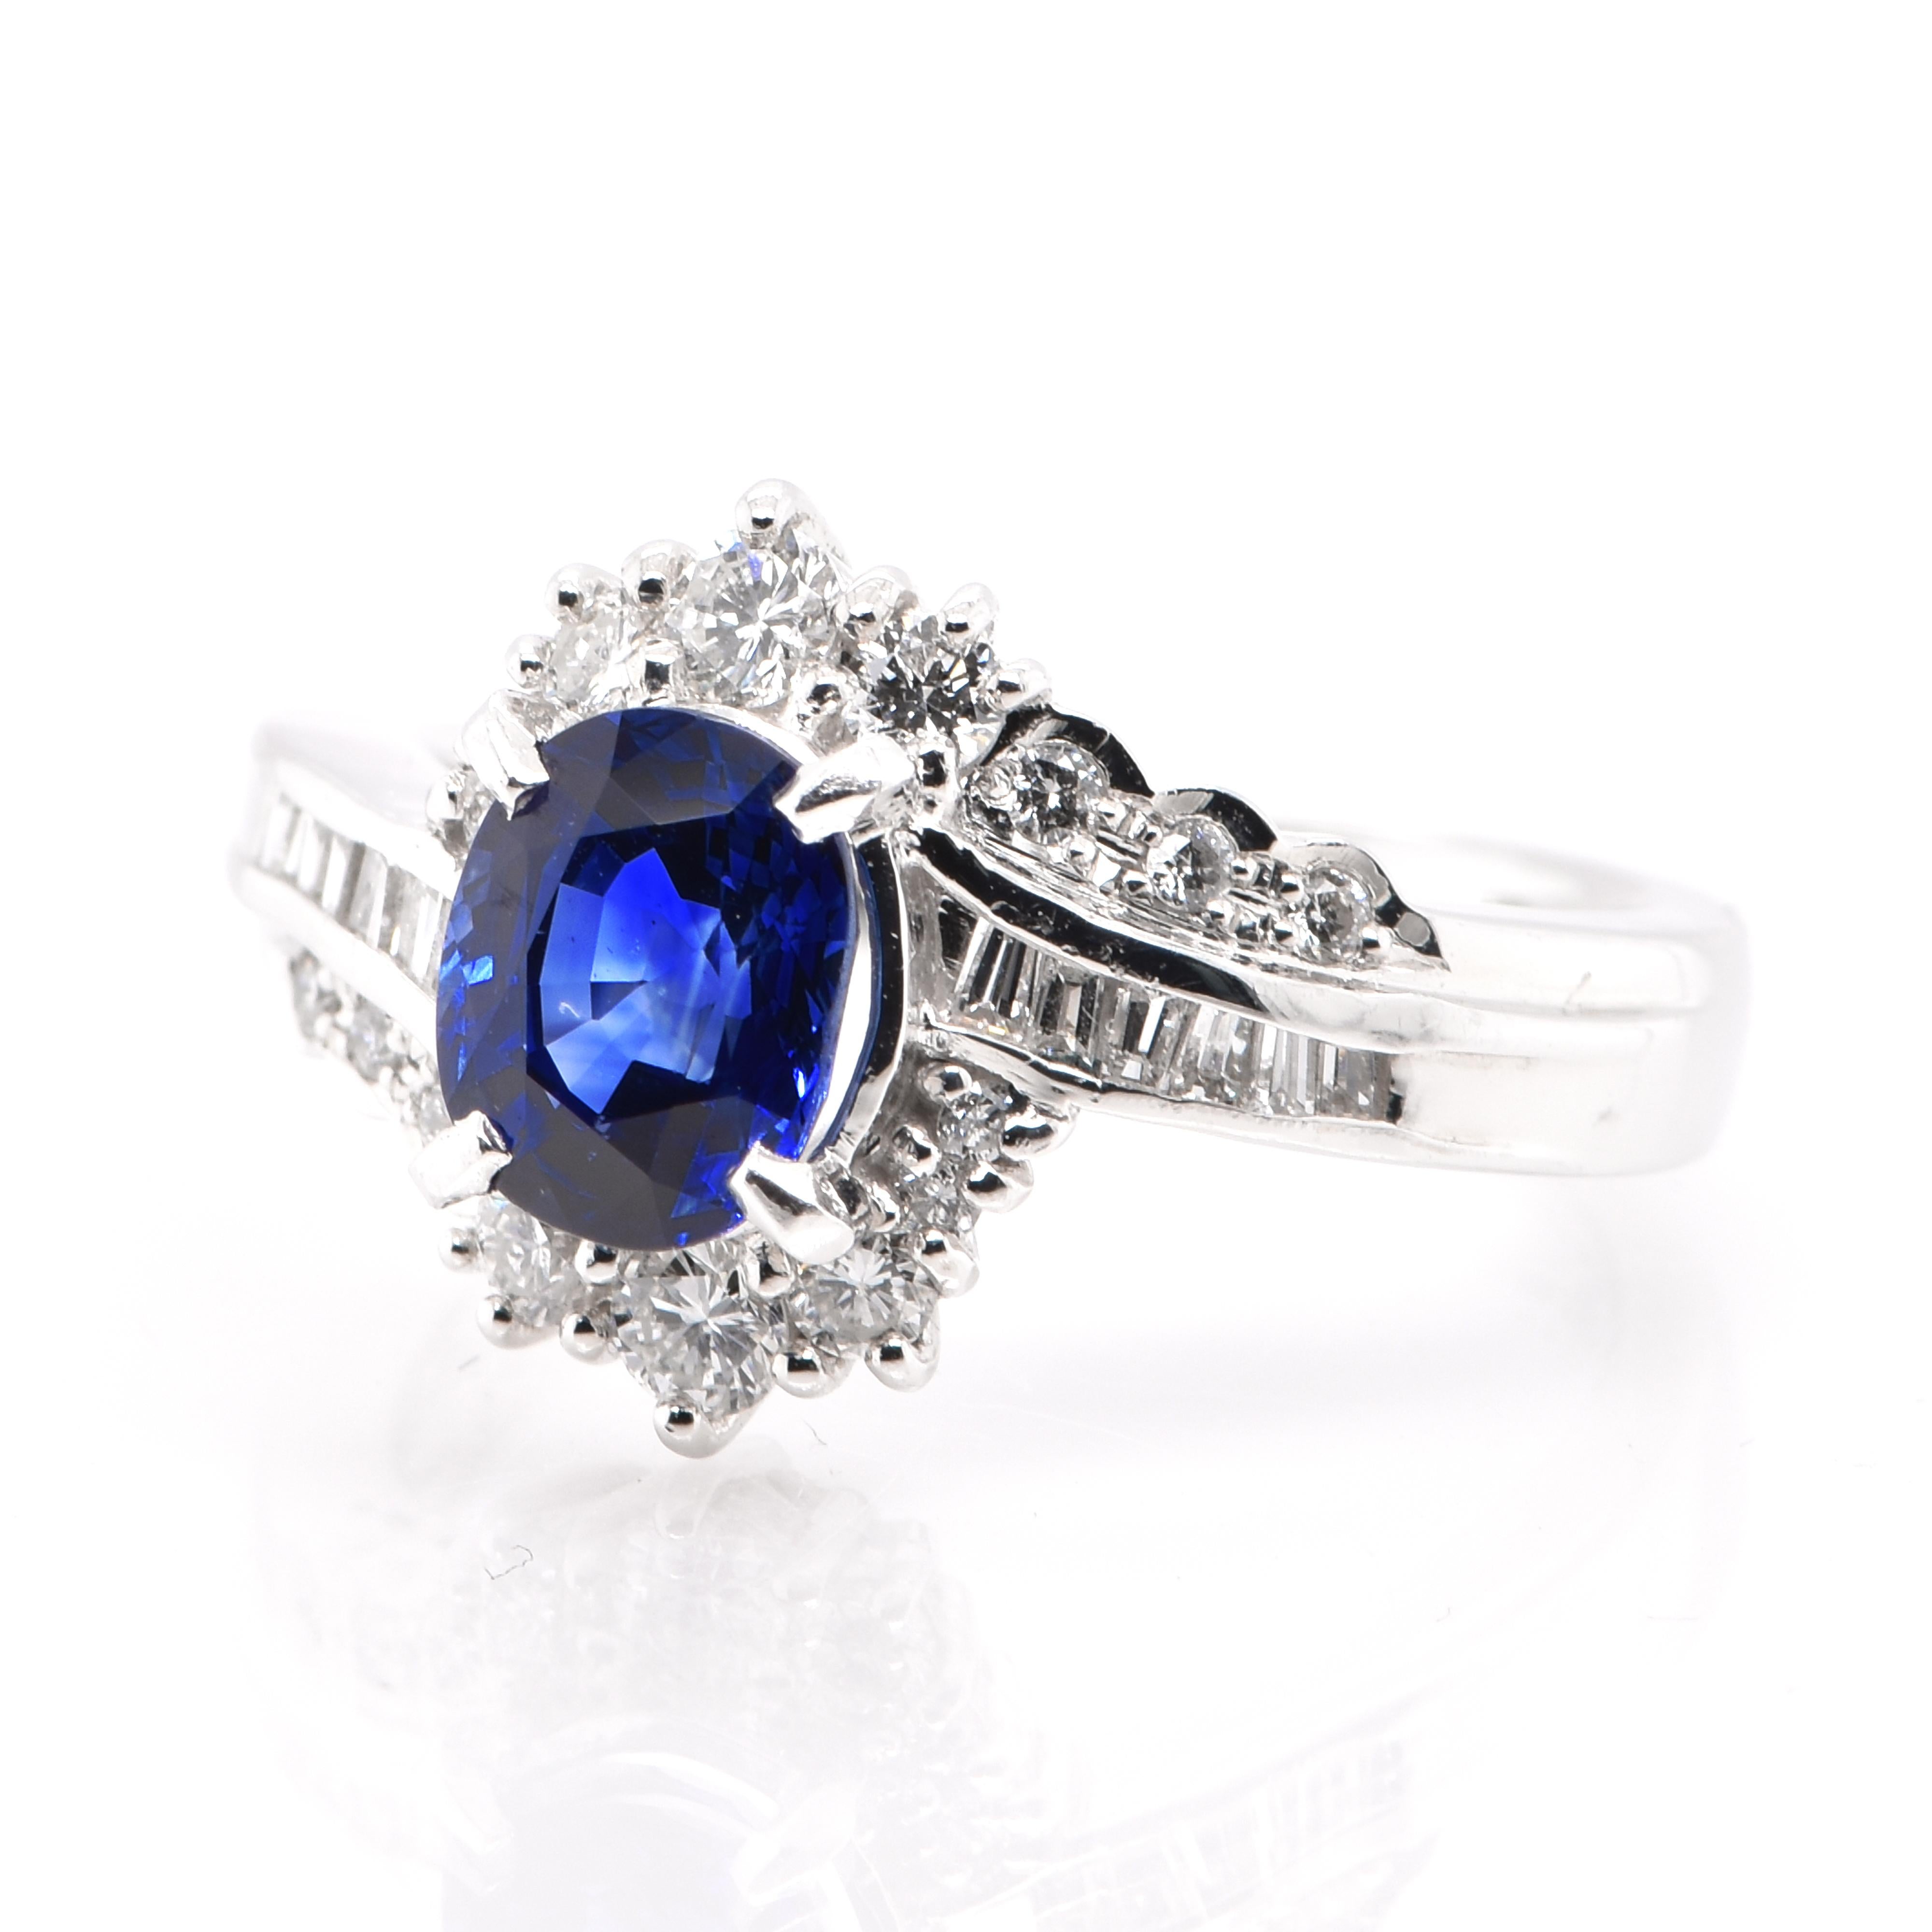 A beautiful Ring featuring a 1.52 Carat, Natural, Blue Sapphire and 0.56 Carats of Diamond Accents set in Platinum. Sapphires have extraordinary durability - they excel in hardness as well as toughness and durability making them very popular in